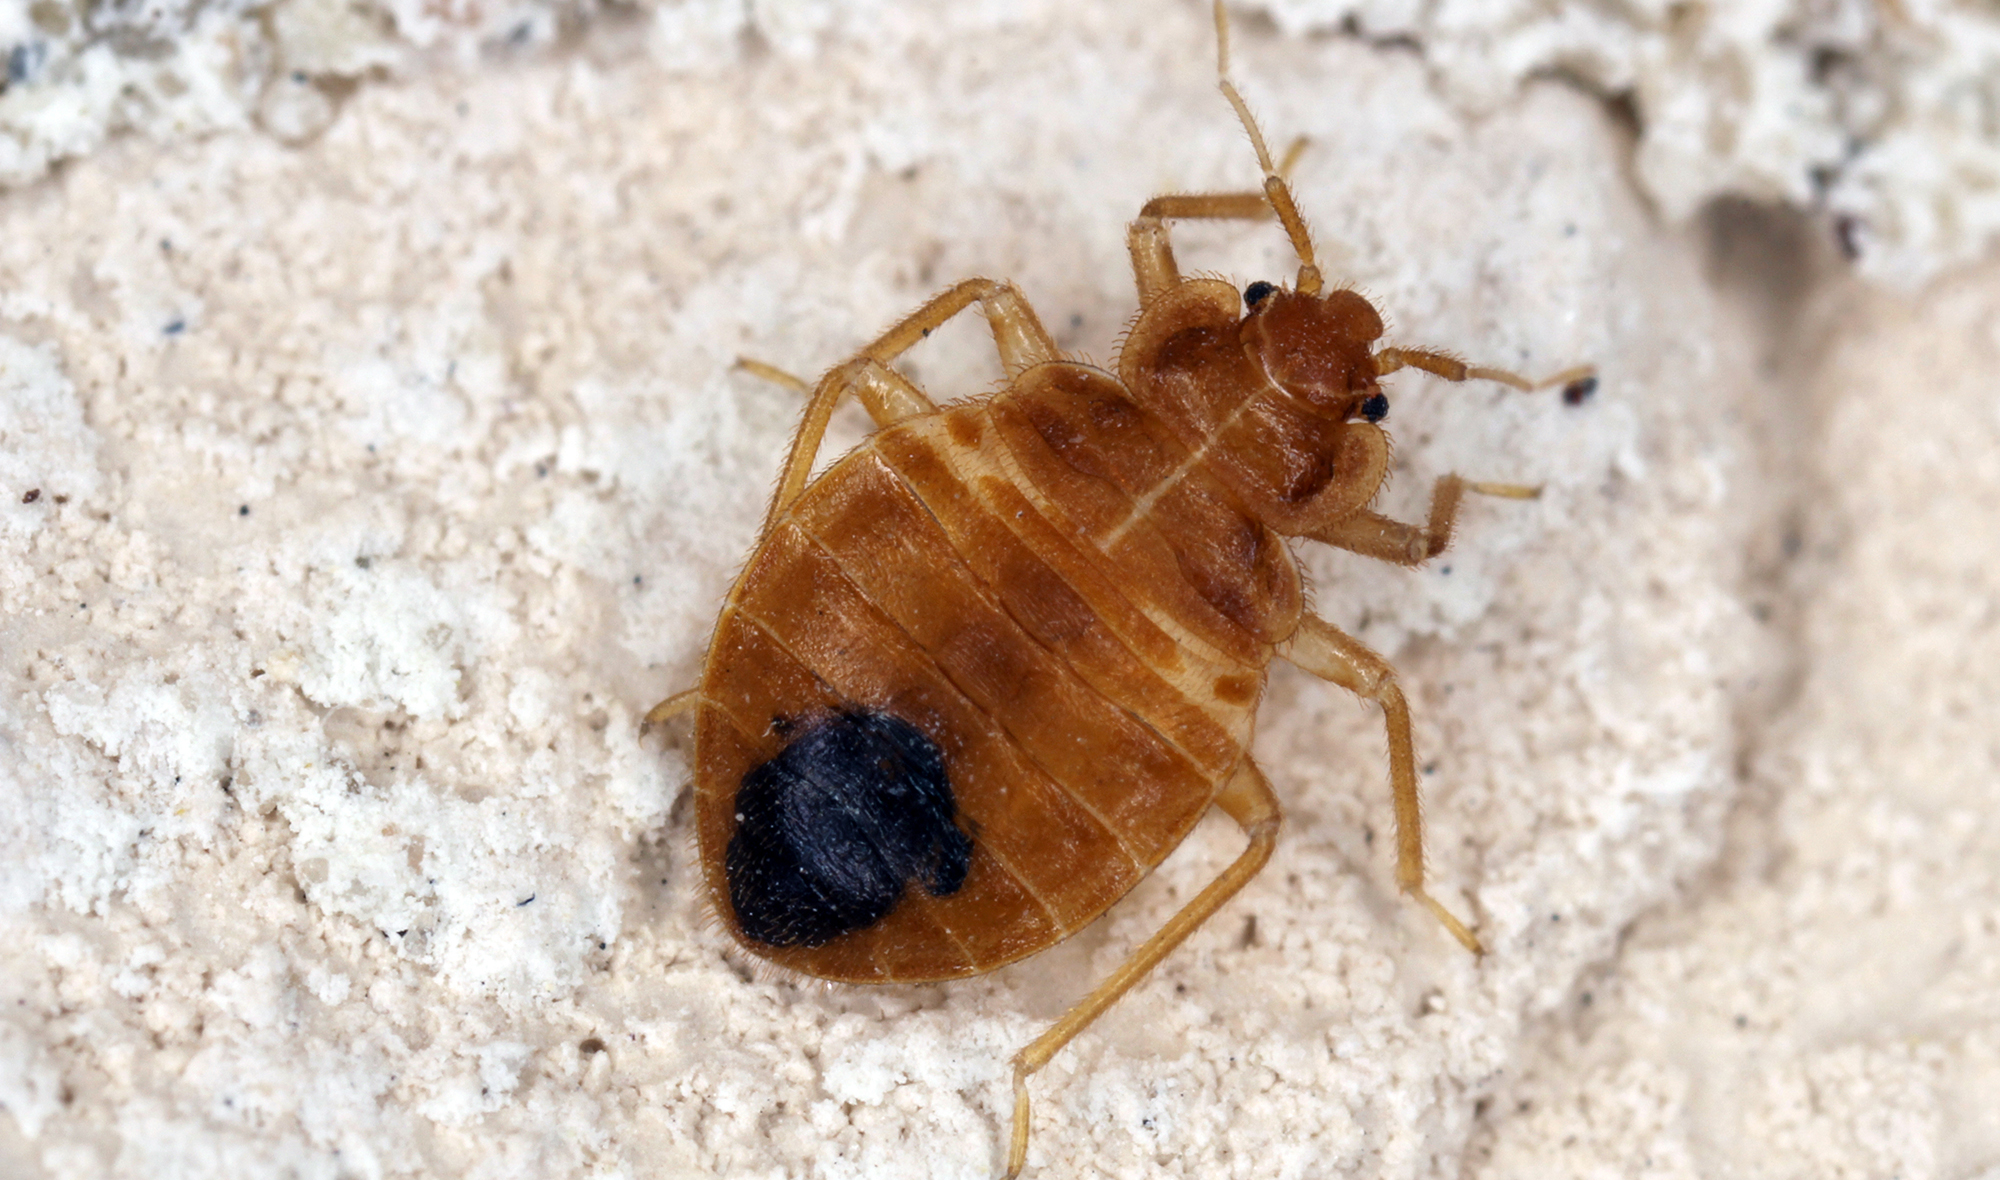 Photo of a bed bug, a pest that can be taken care of by calling Steve's Pest Control